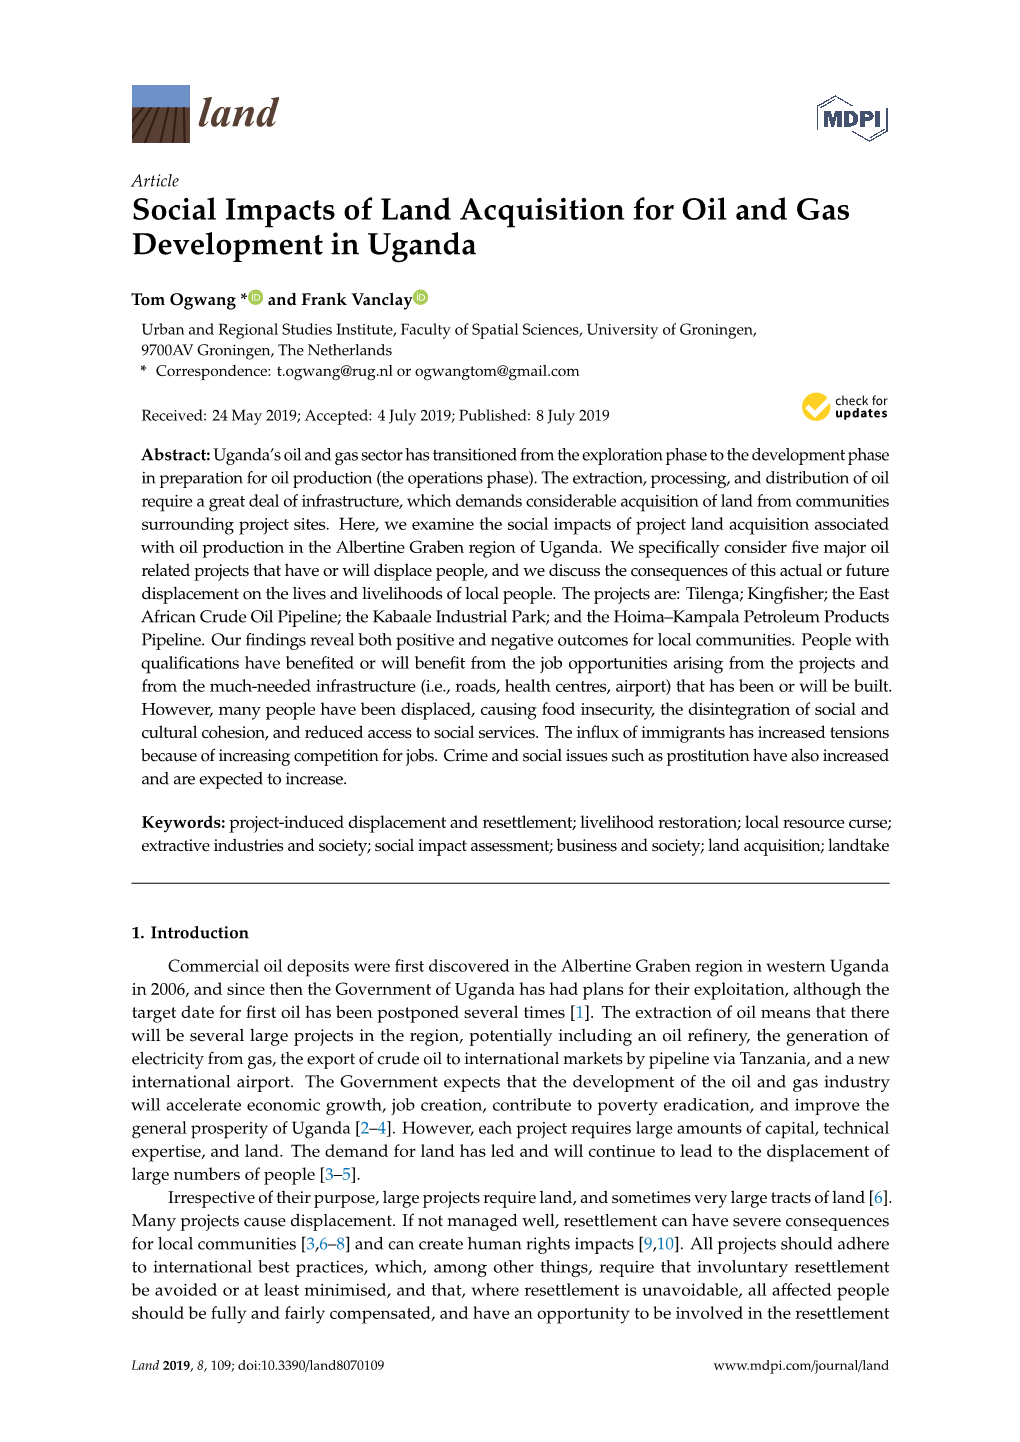 Social Impacts of Land Acquisition for Oil and Gas Development in Uganda